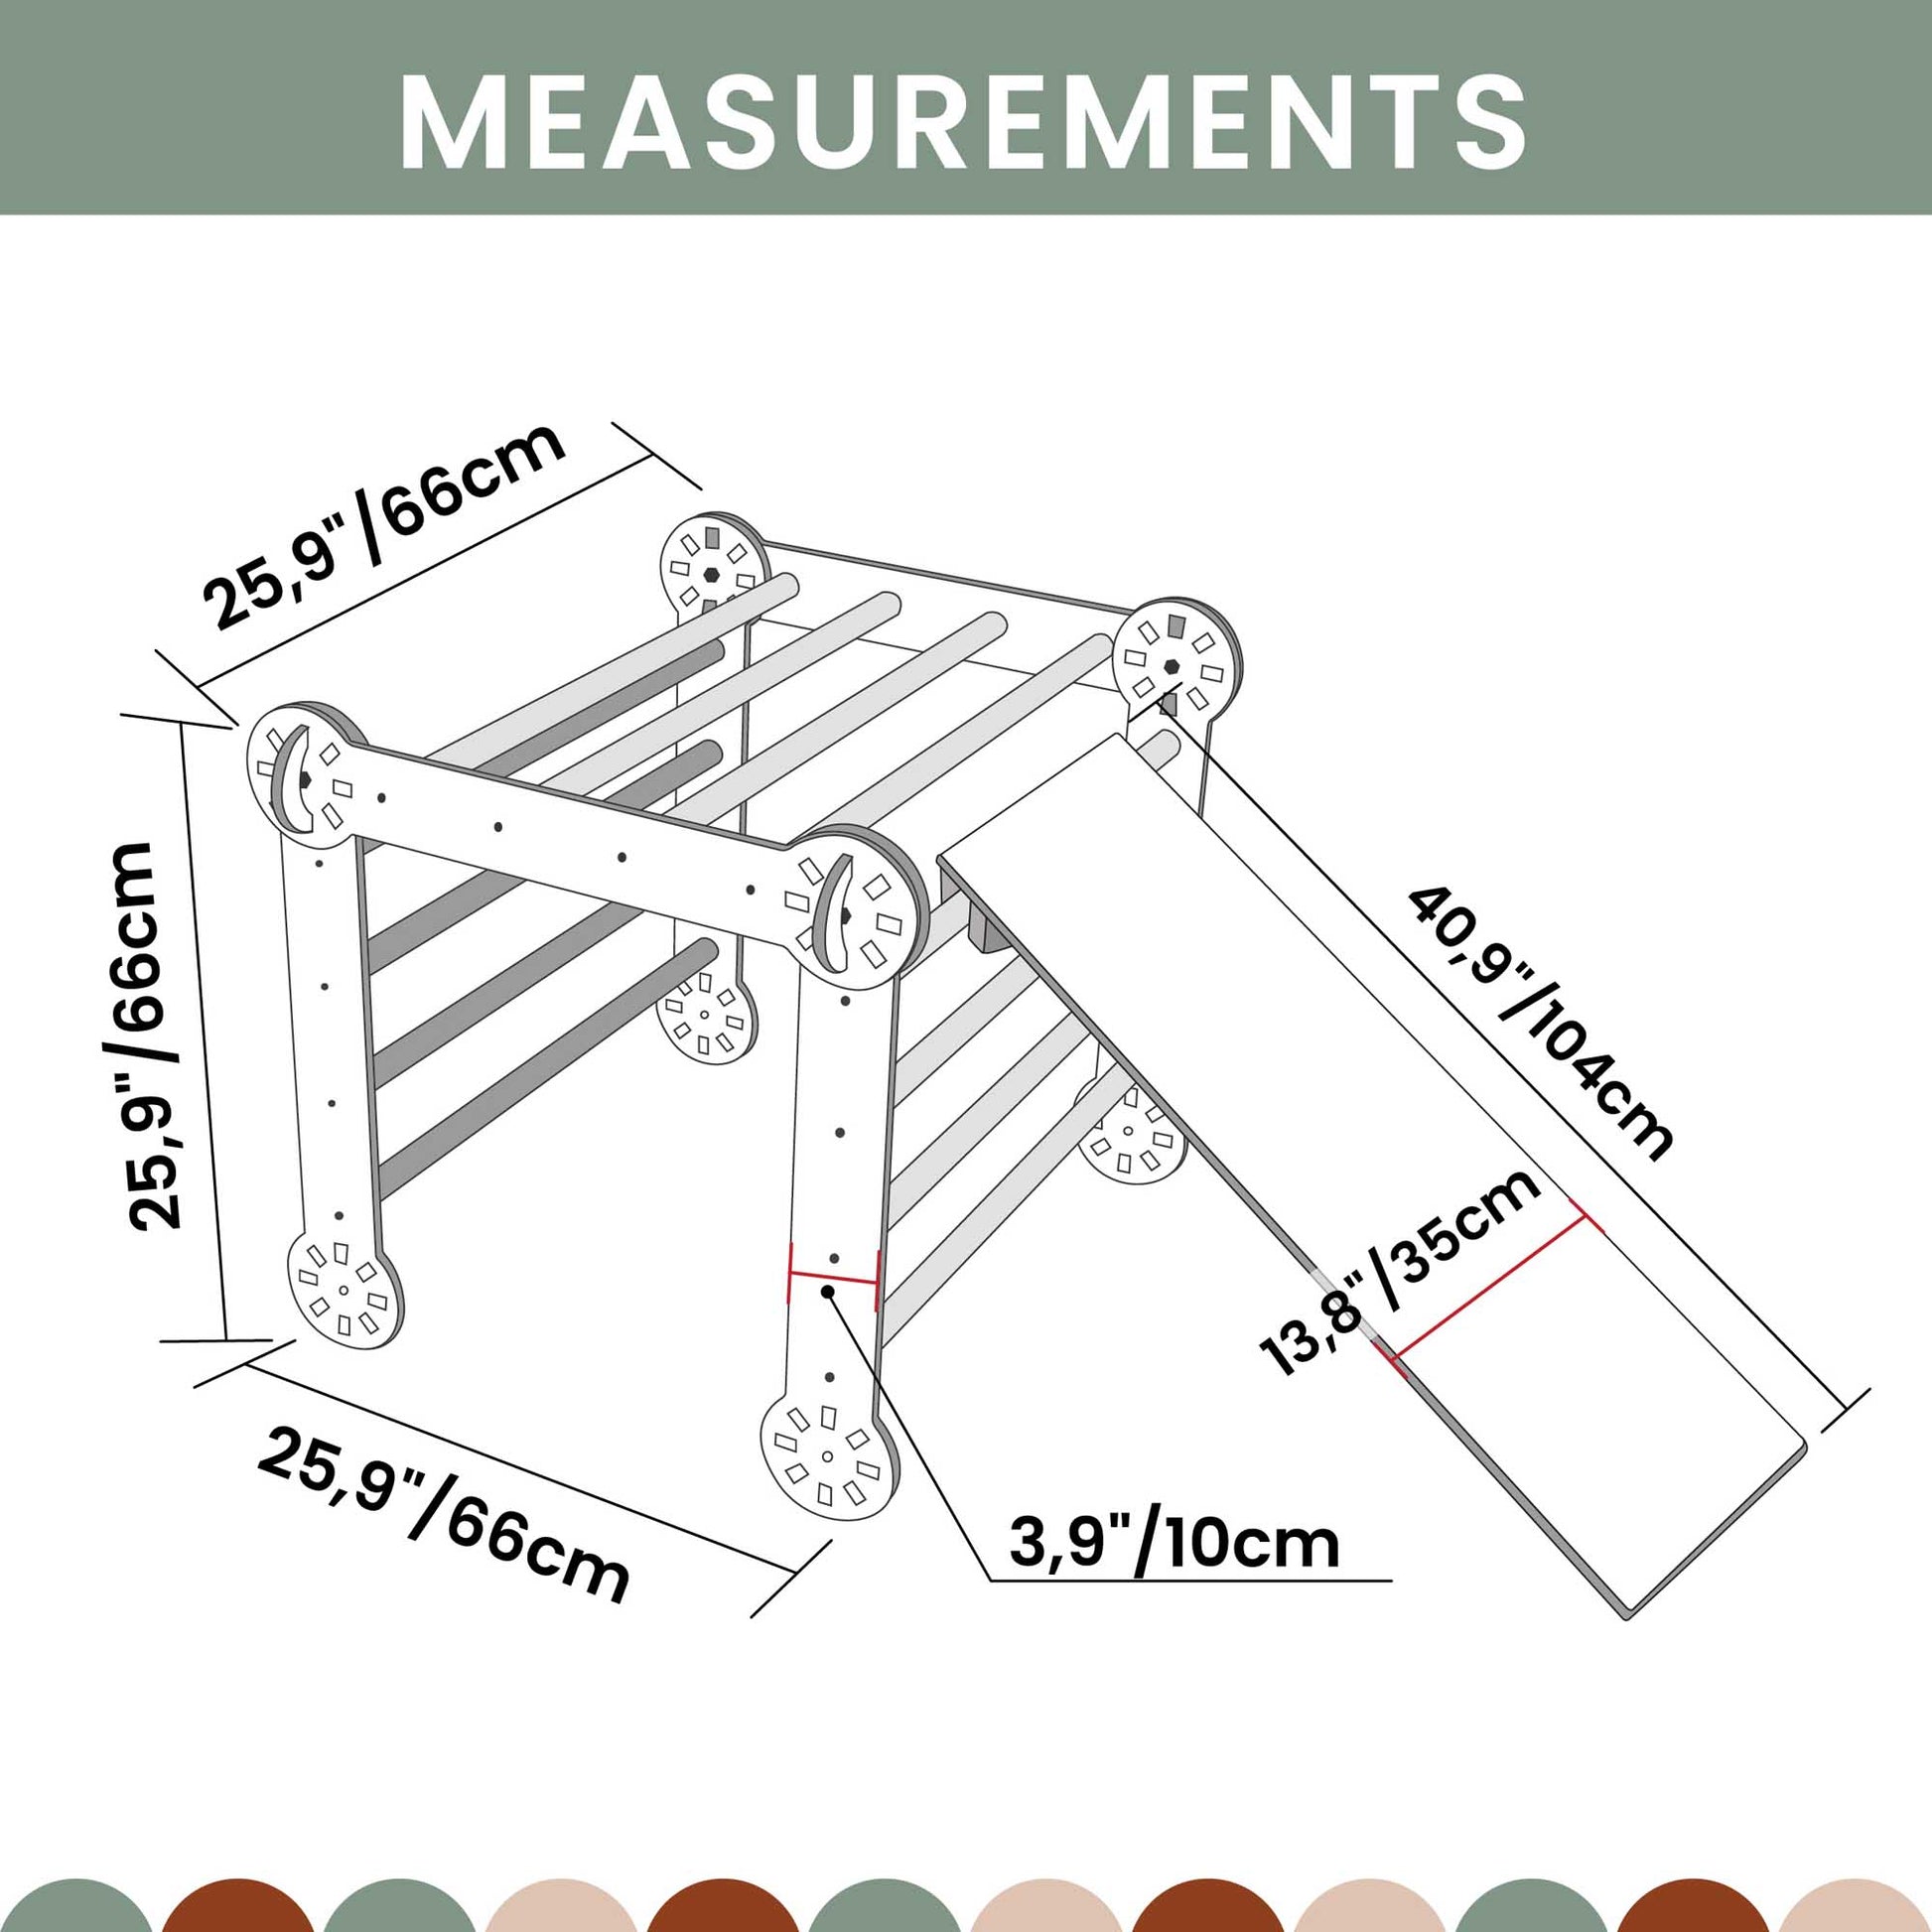 A diagram showing the measurements of a Climbing arch + Transformable climbing gym + a ramp.